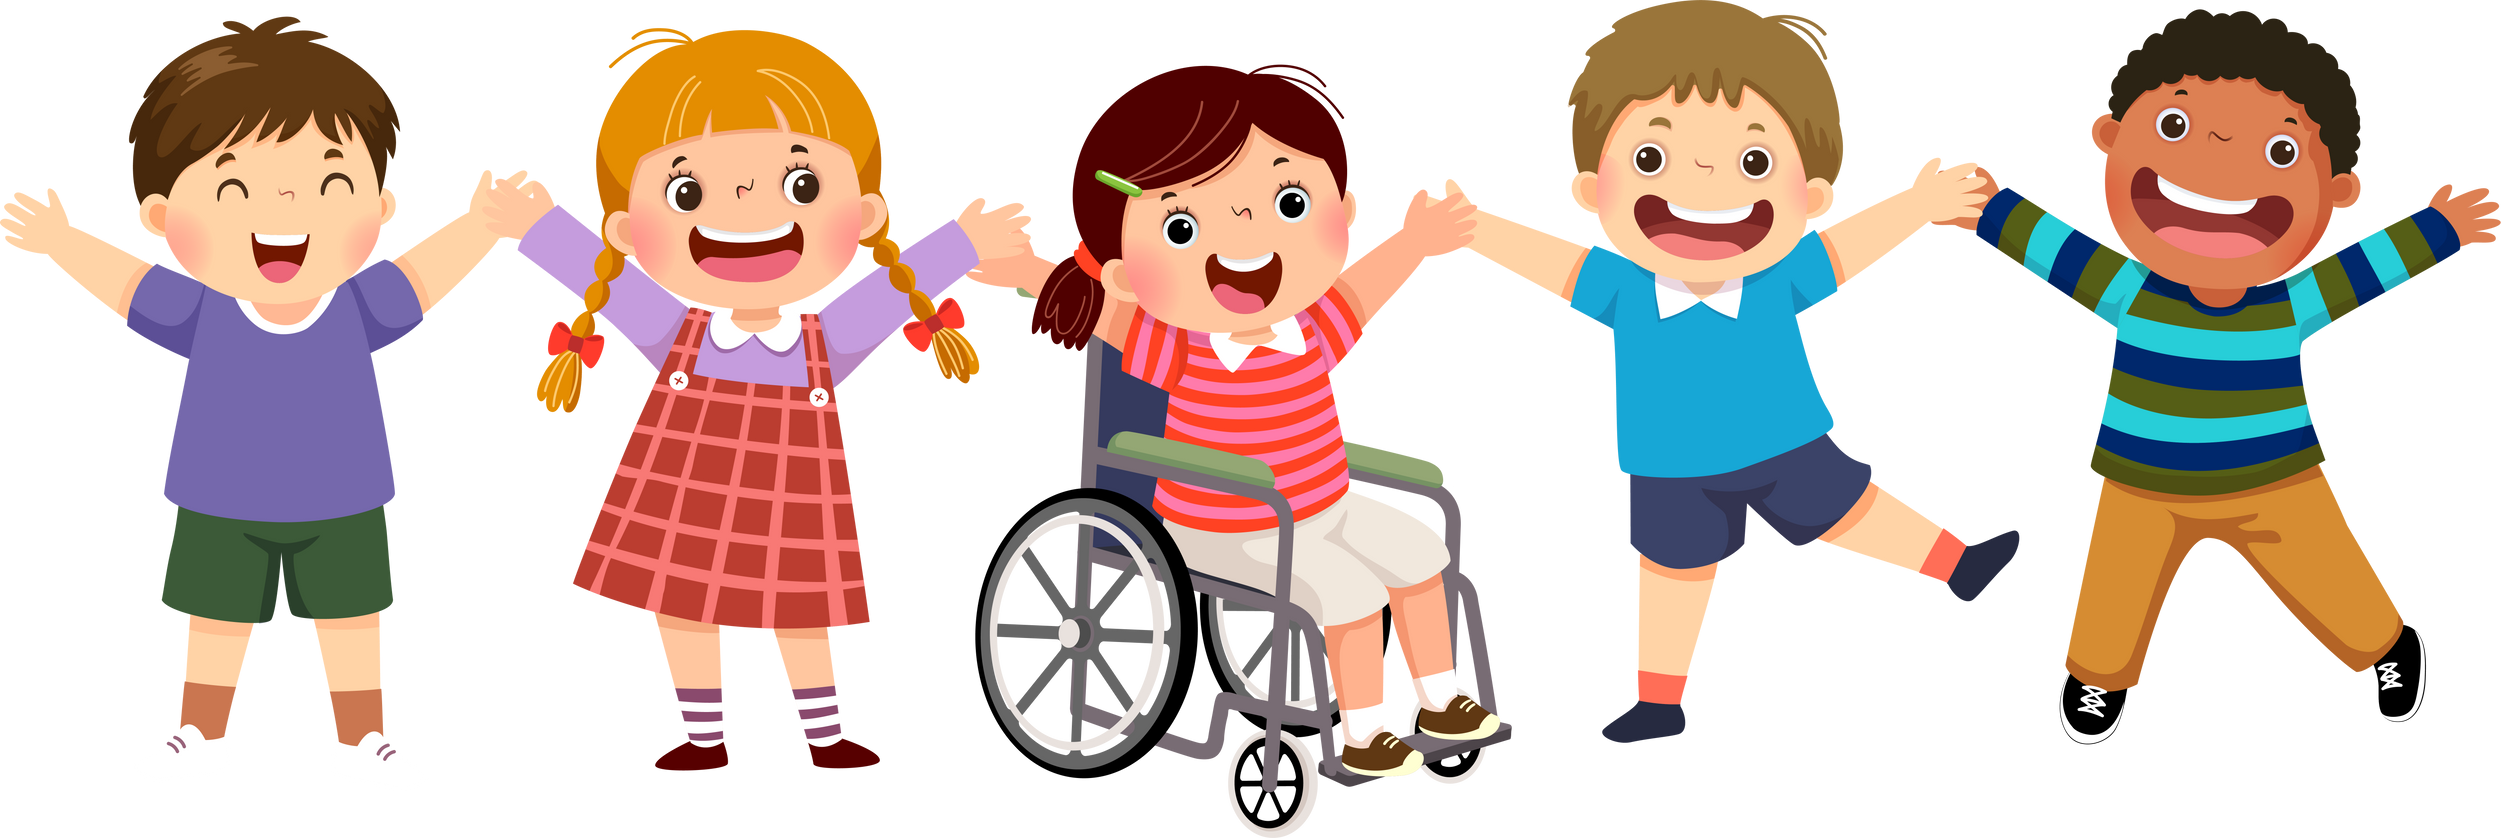 Happy disabled girl in a wheelchair and her friends jumping together